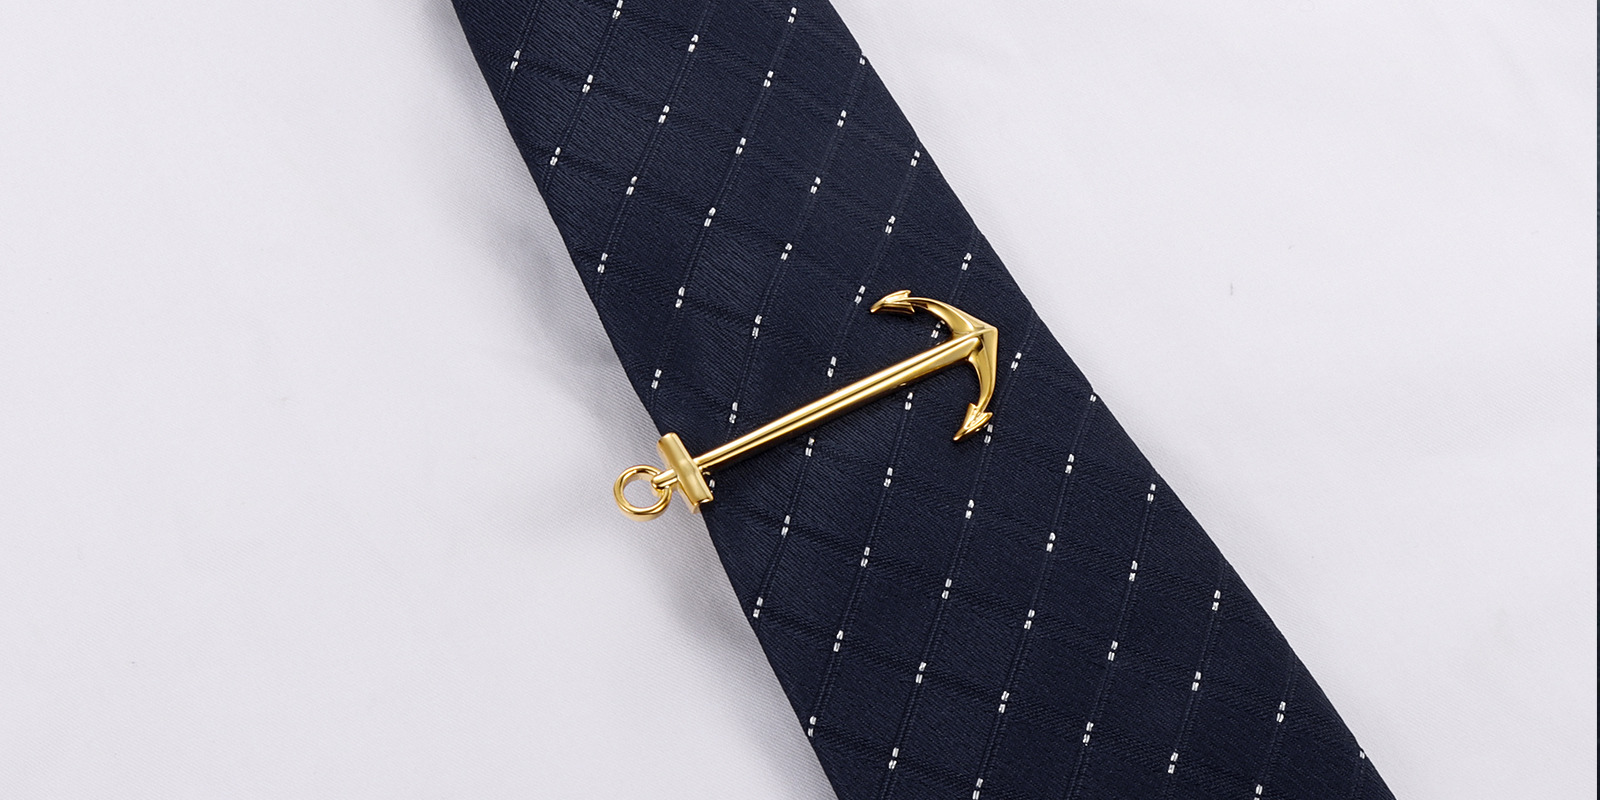 Which Materials Are Frequently Used to Make Tie Clips In The Colour Gold?